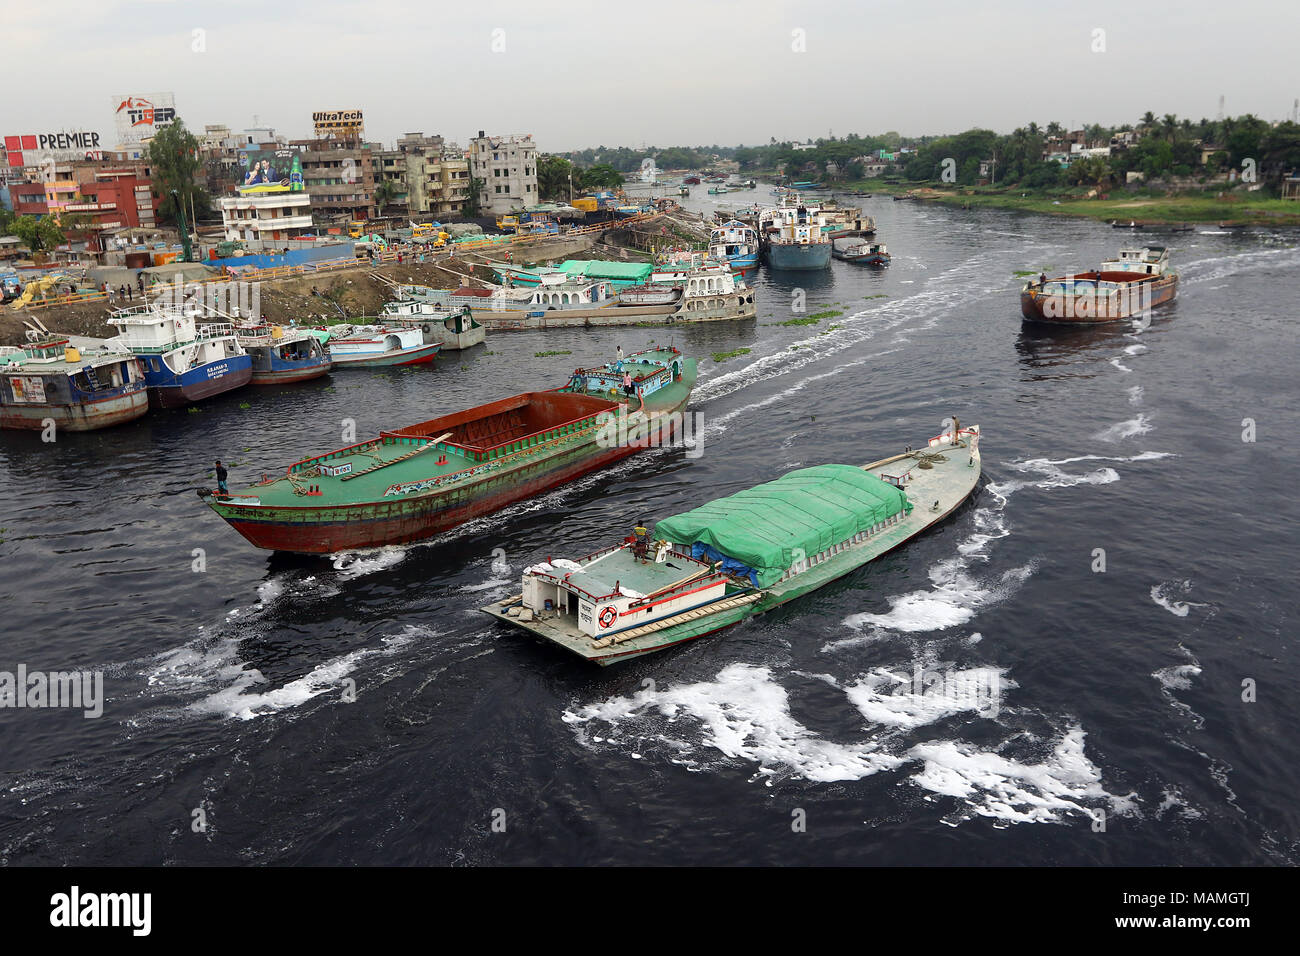 DHAKA-2018. Boats on the polluted turag River in Dhaka. Stock Photo